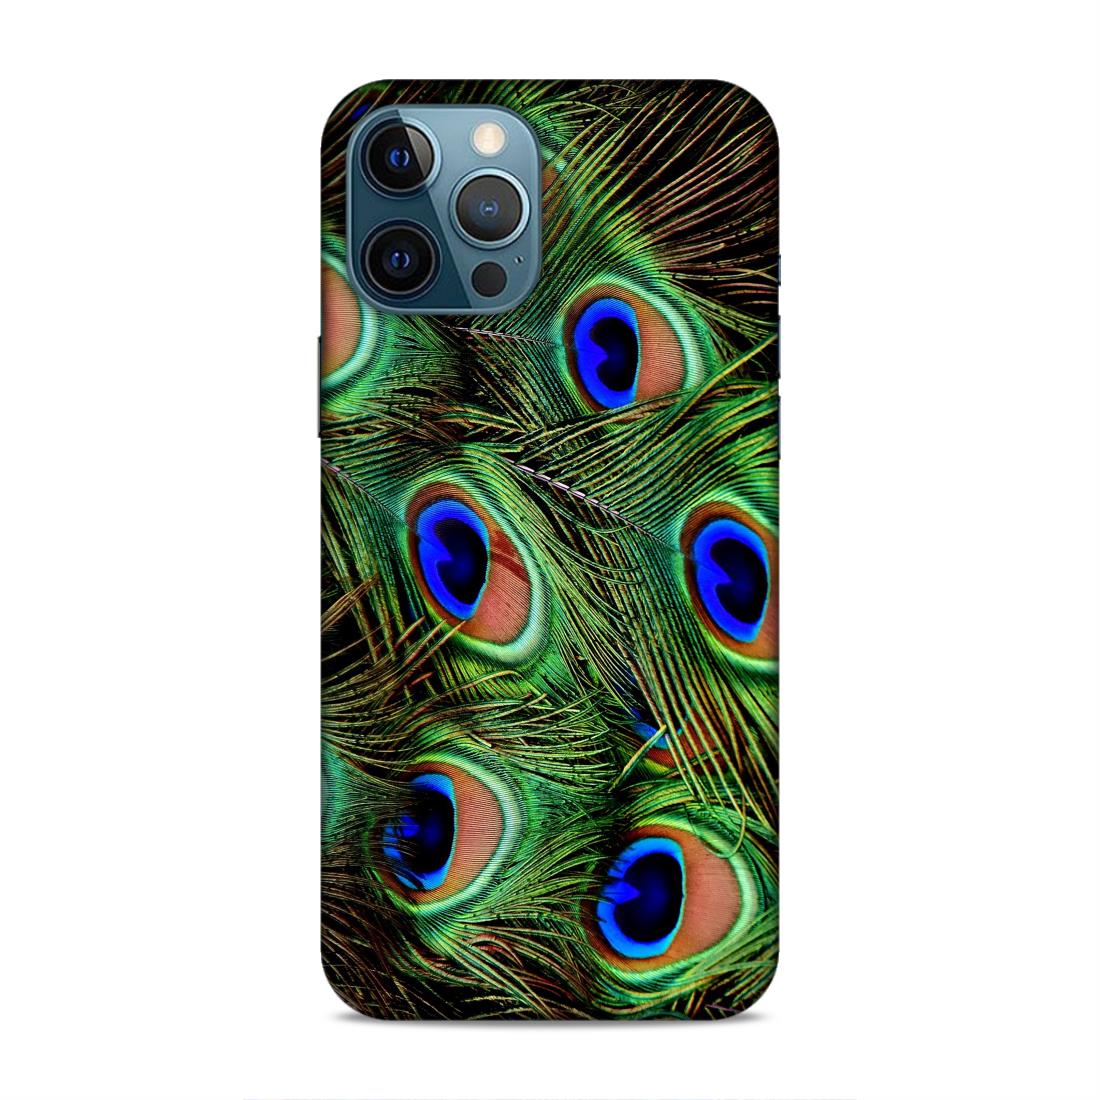 Peacock Feather Hard Back Case For Apple iPhone 12 Pro Max